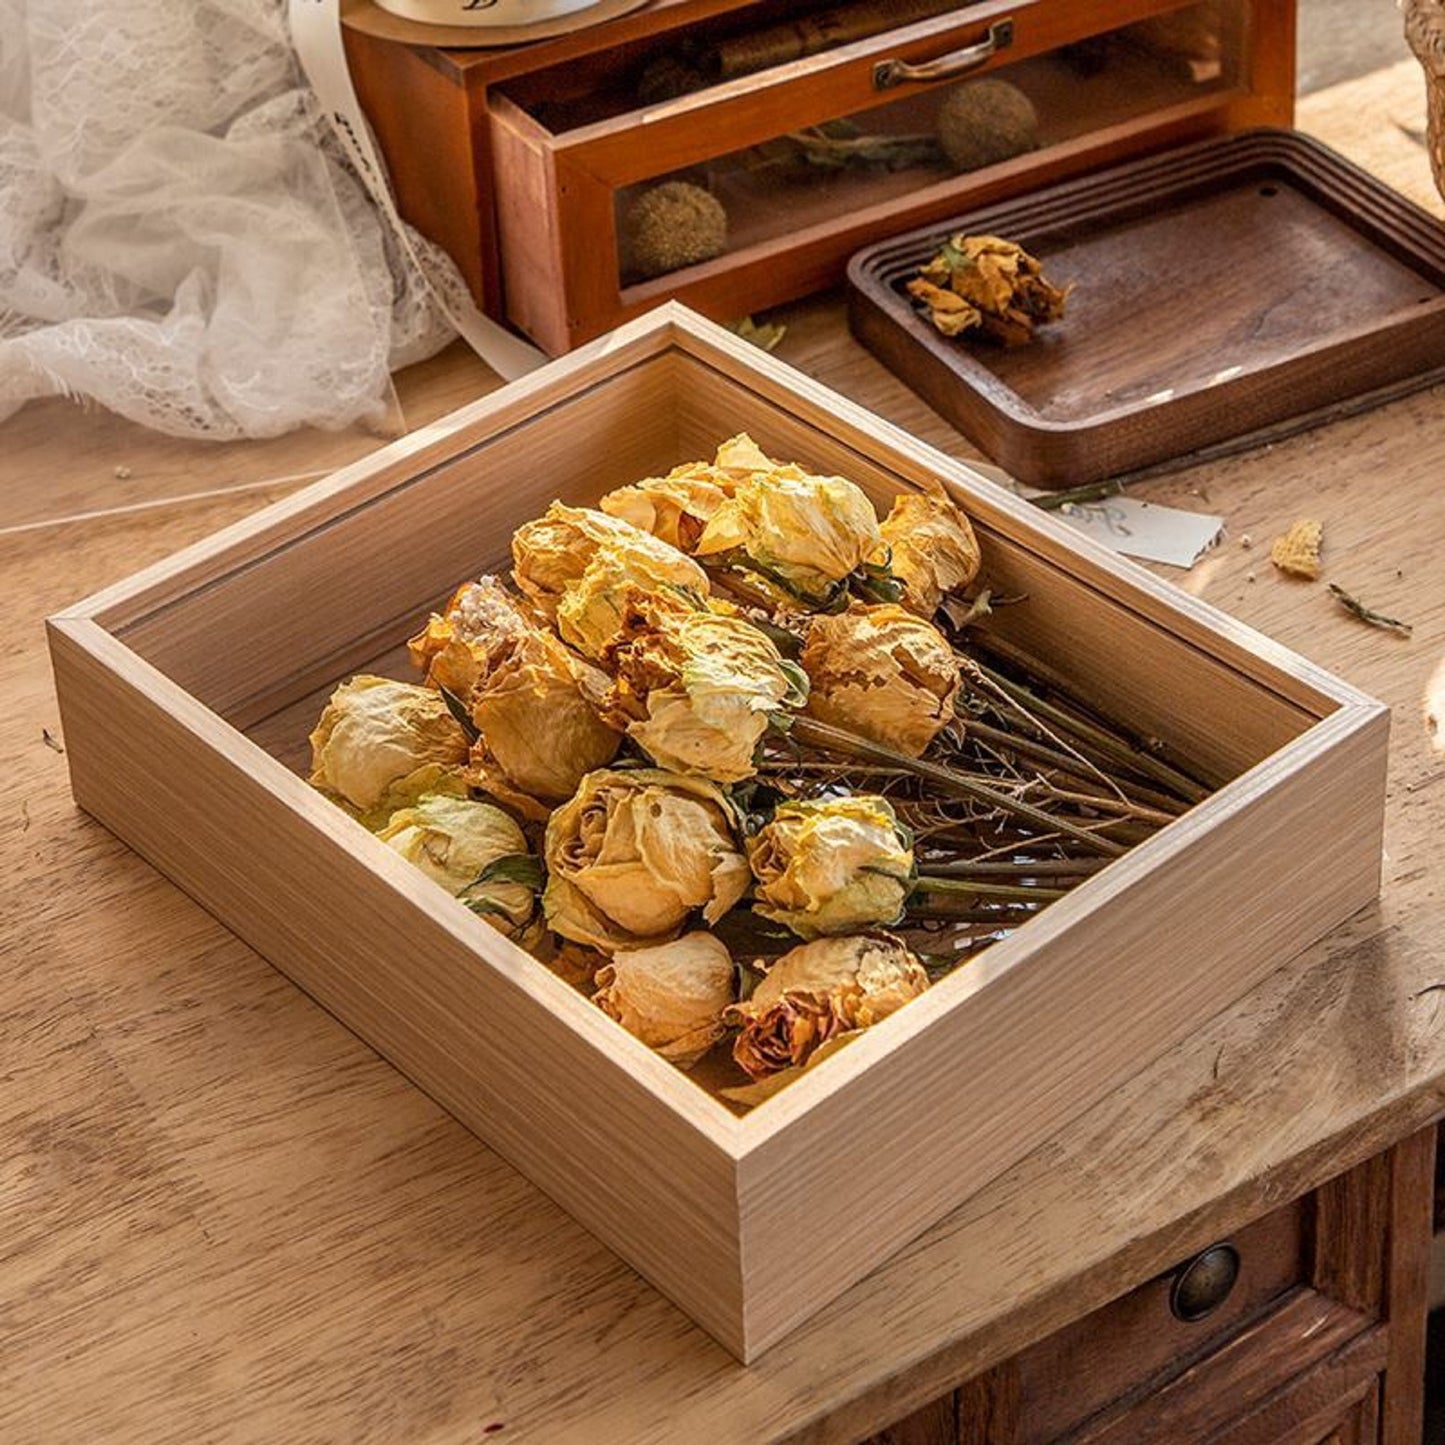 JIYUERLTD Wooden DIY Collectible Treasure Box - 12" Organize, Display, and Showcase Your Collectibles, Blocks, Dried Flowers, Pinecones, and Shells in Style!